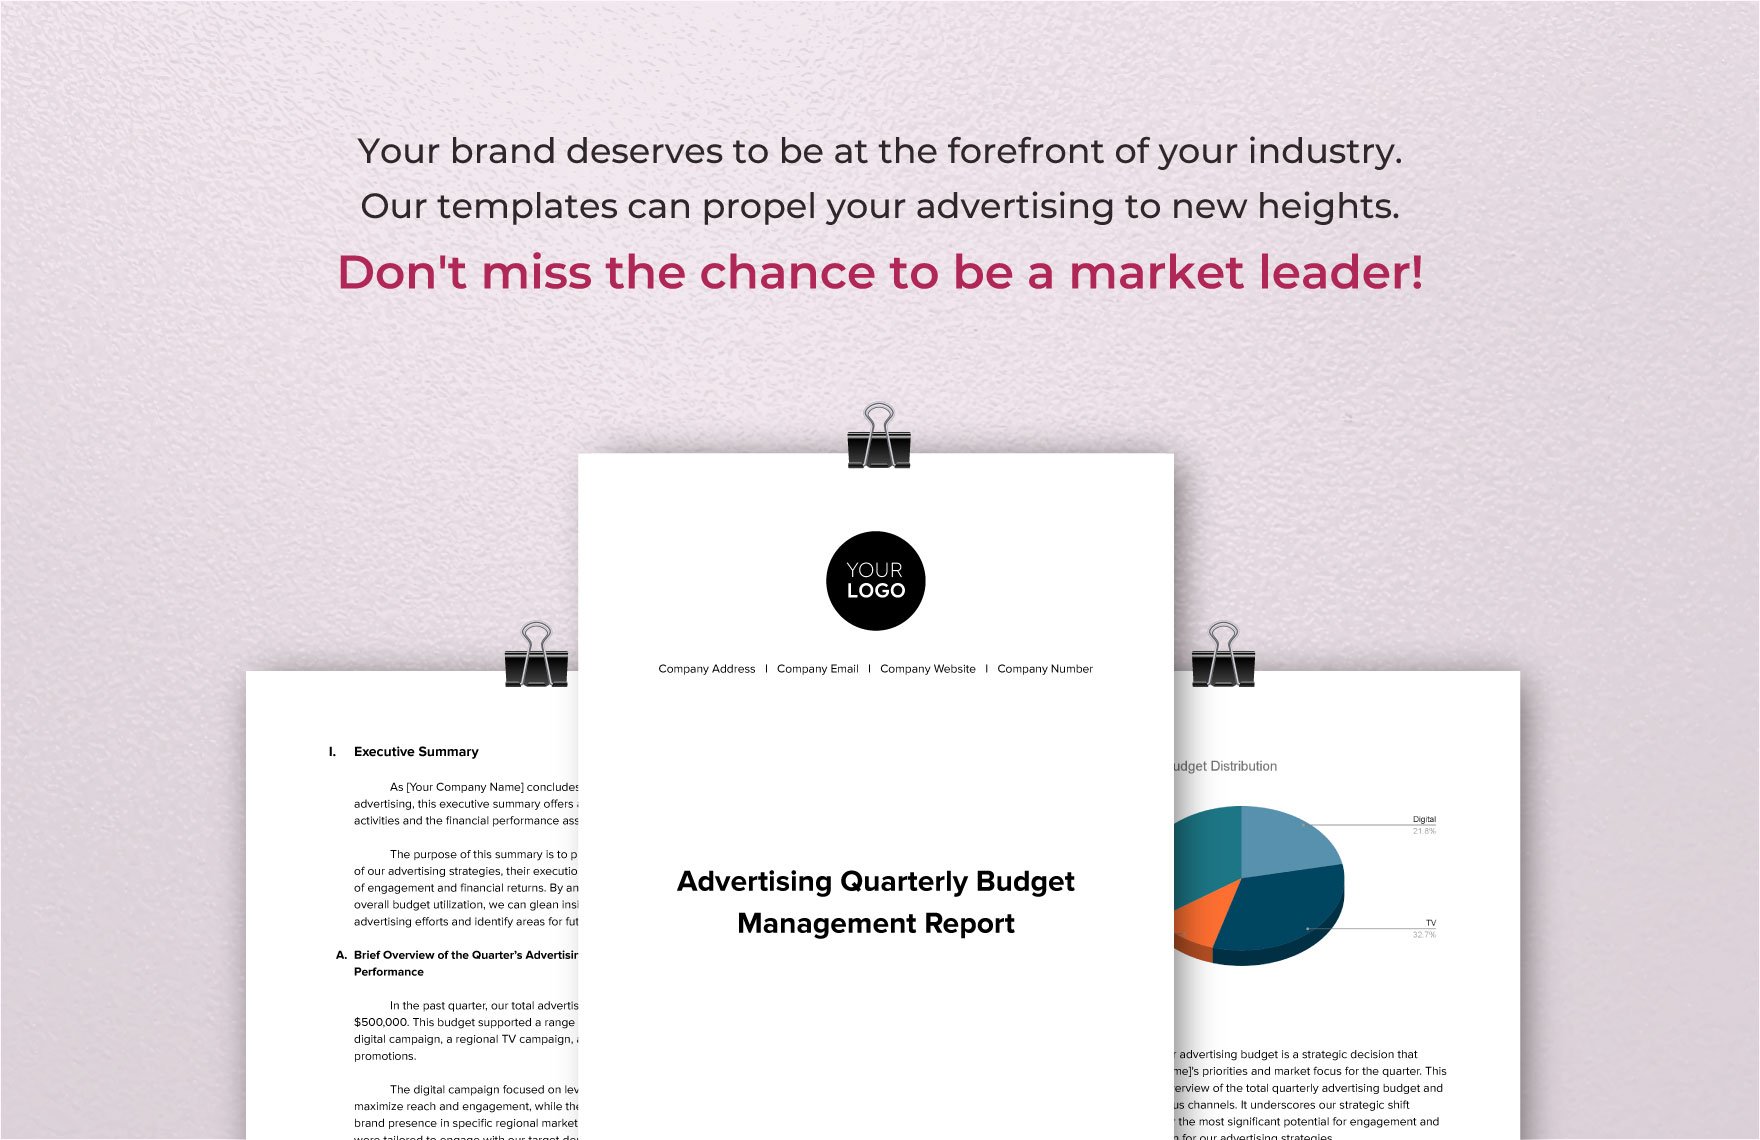 Advertising Quarterly Budget Management Report Template